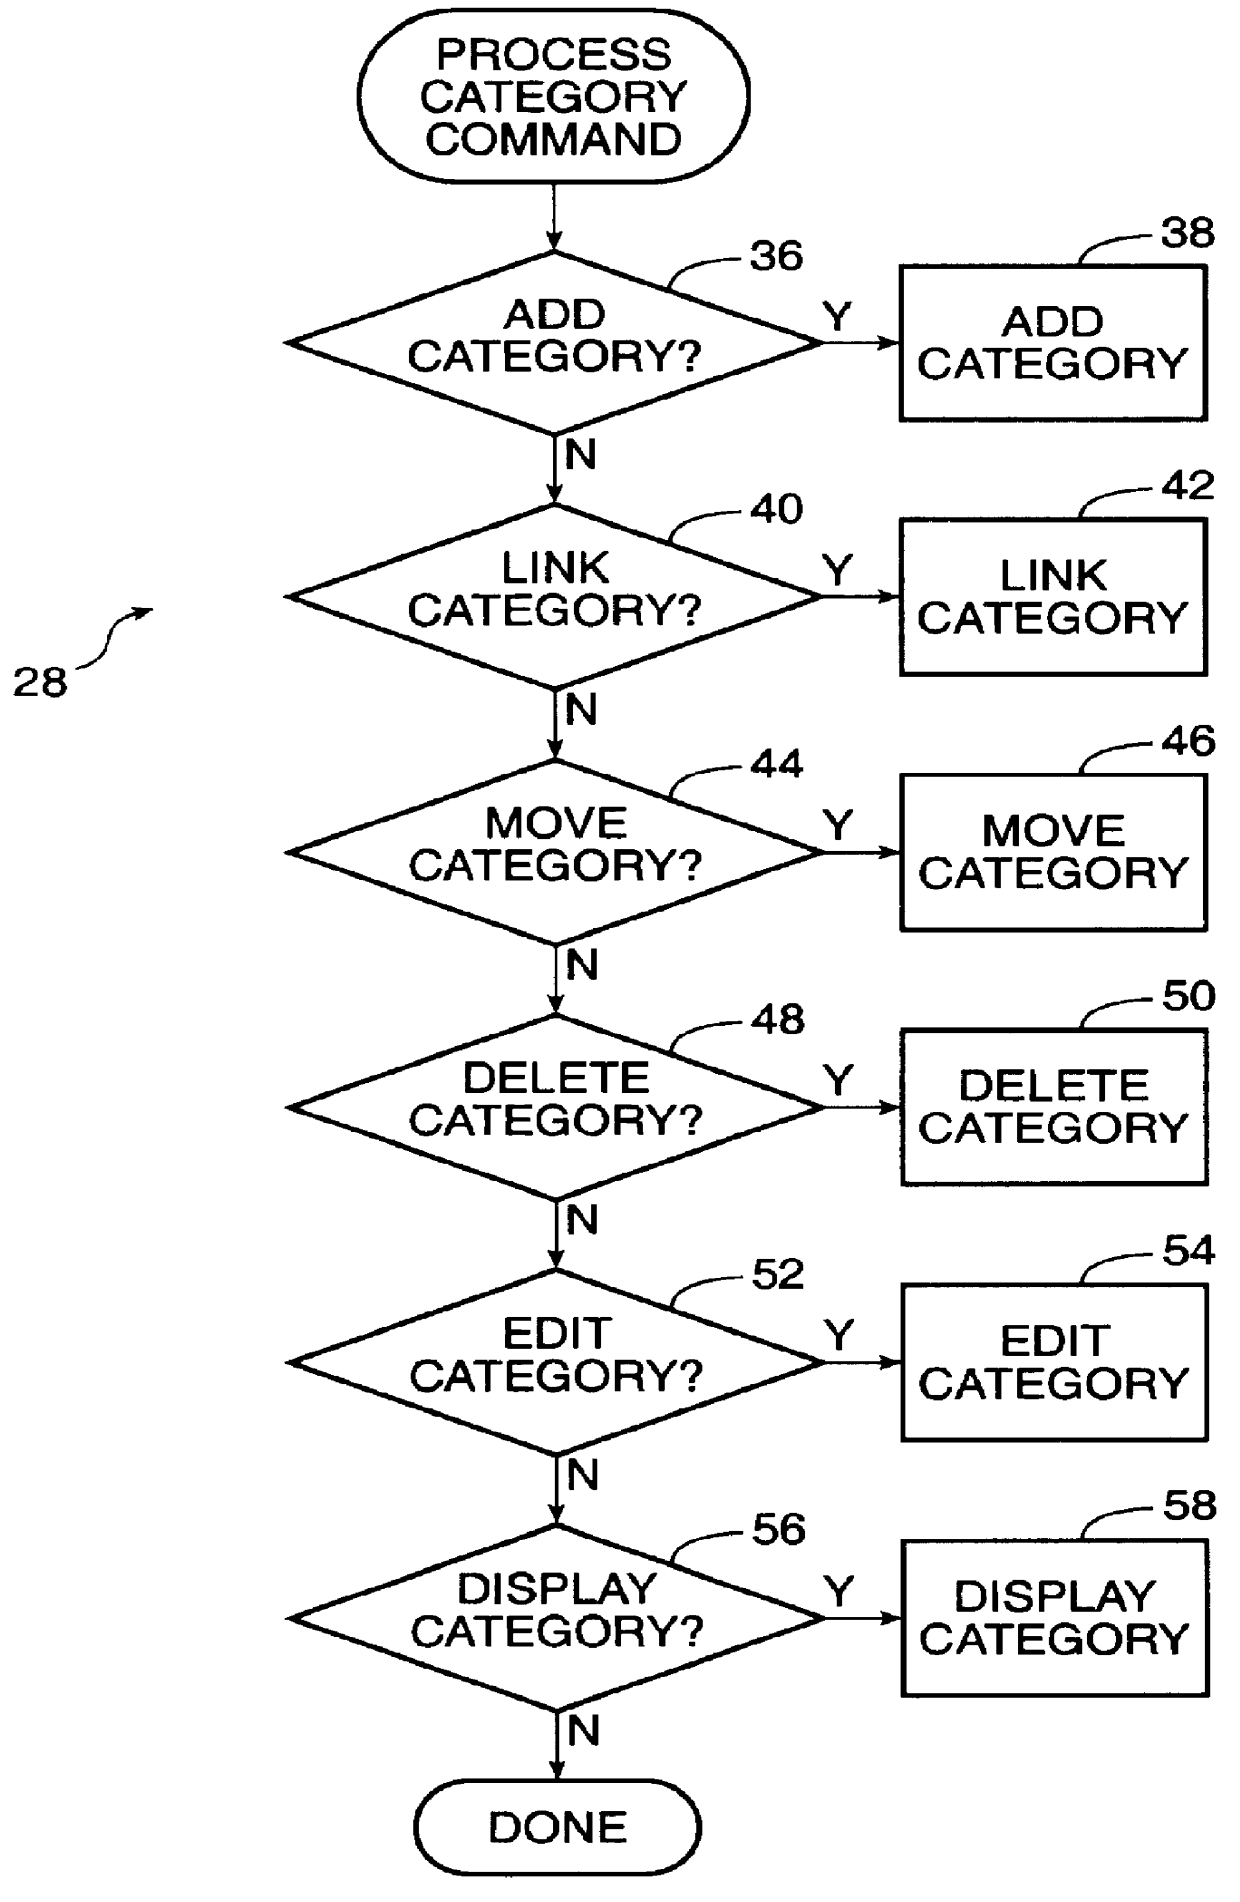 A method and apparatus for searching for documents stored within a document directory hierarchy